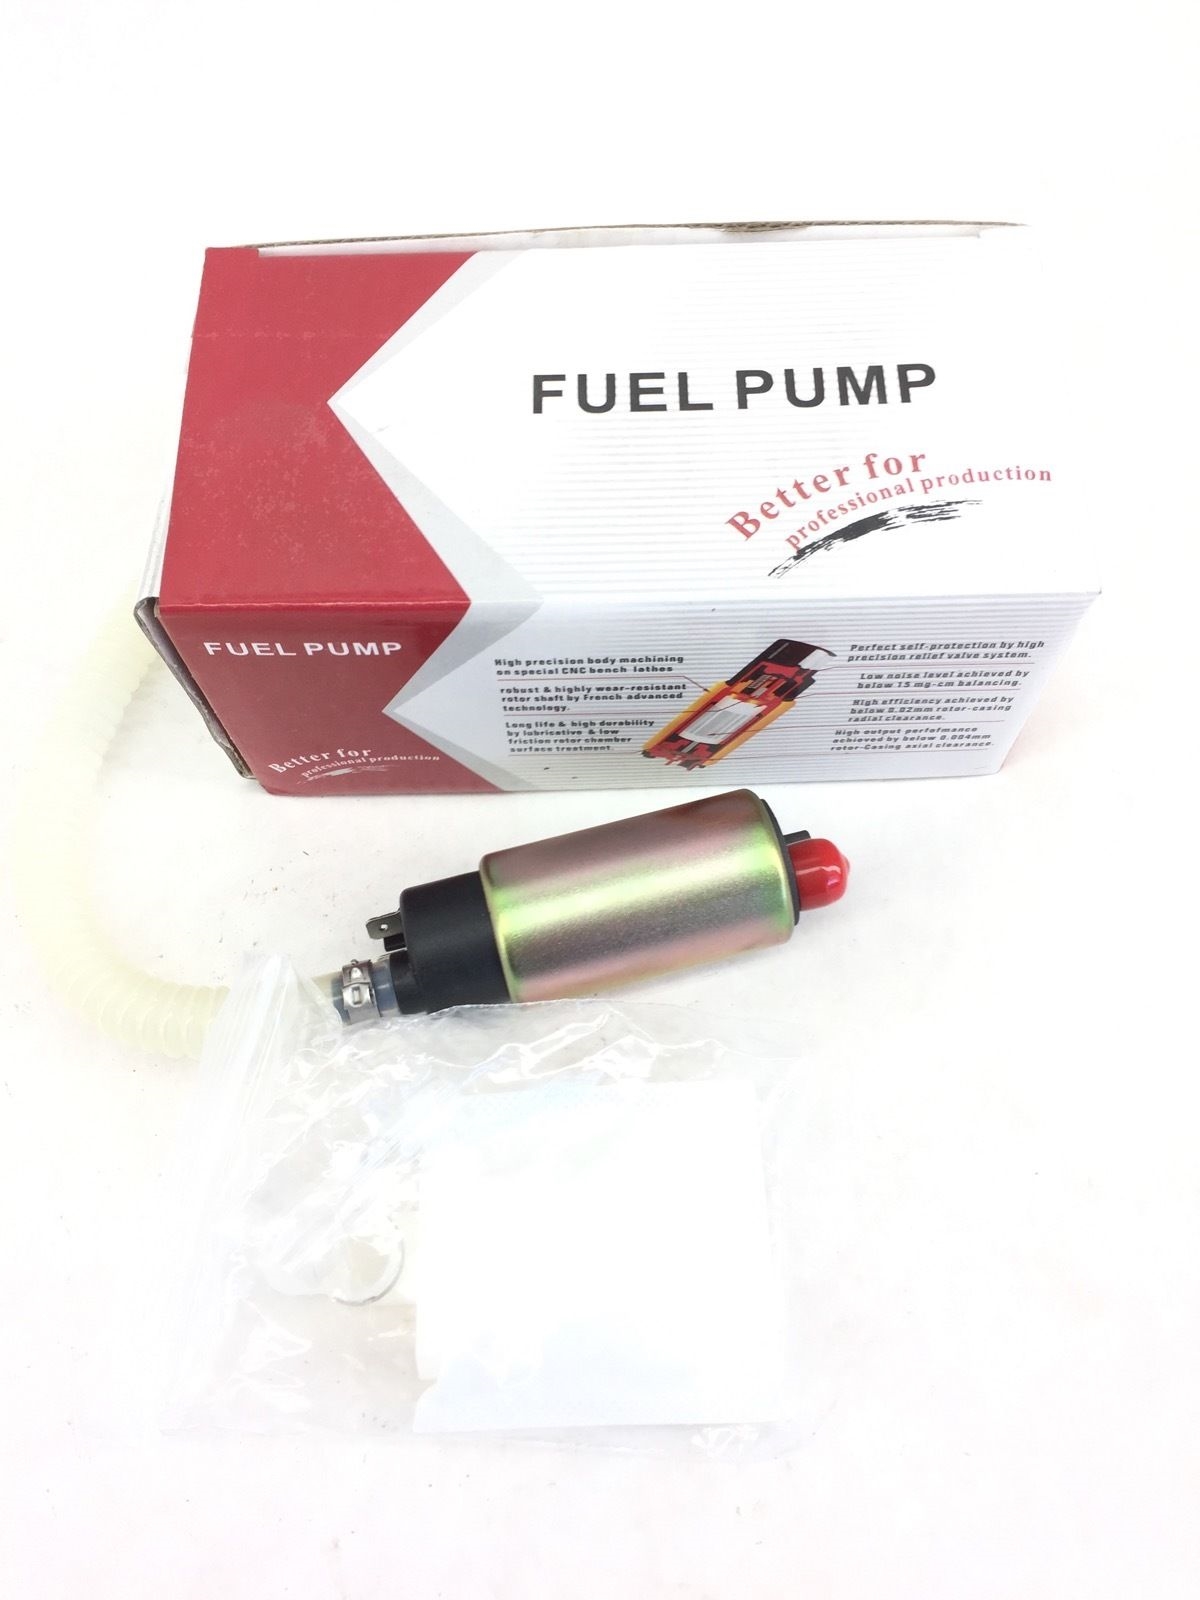 FUEL PUMP KM-72 NEW IN BOX FAST SHIPPING (A400) 1